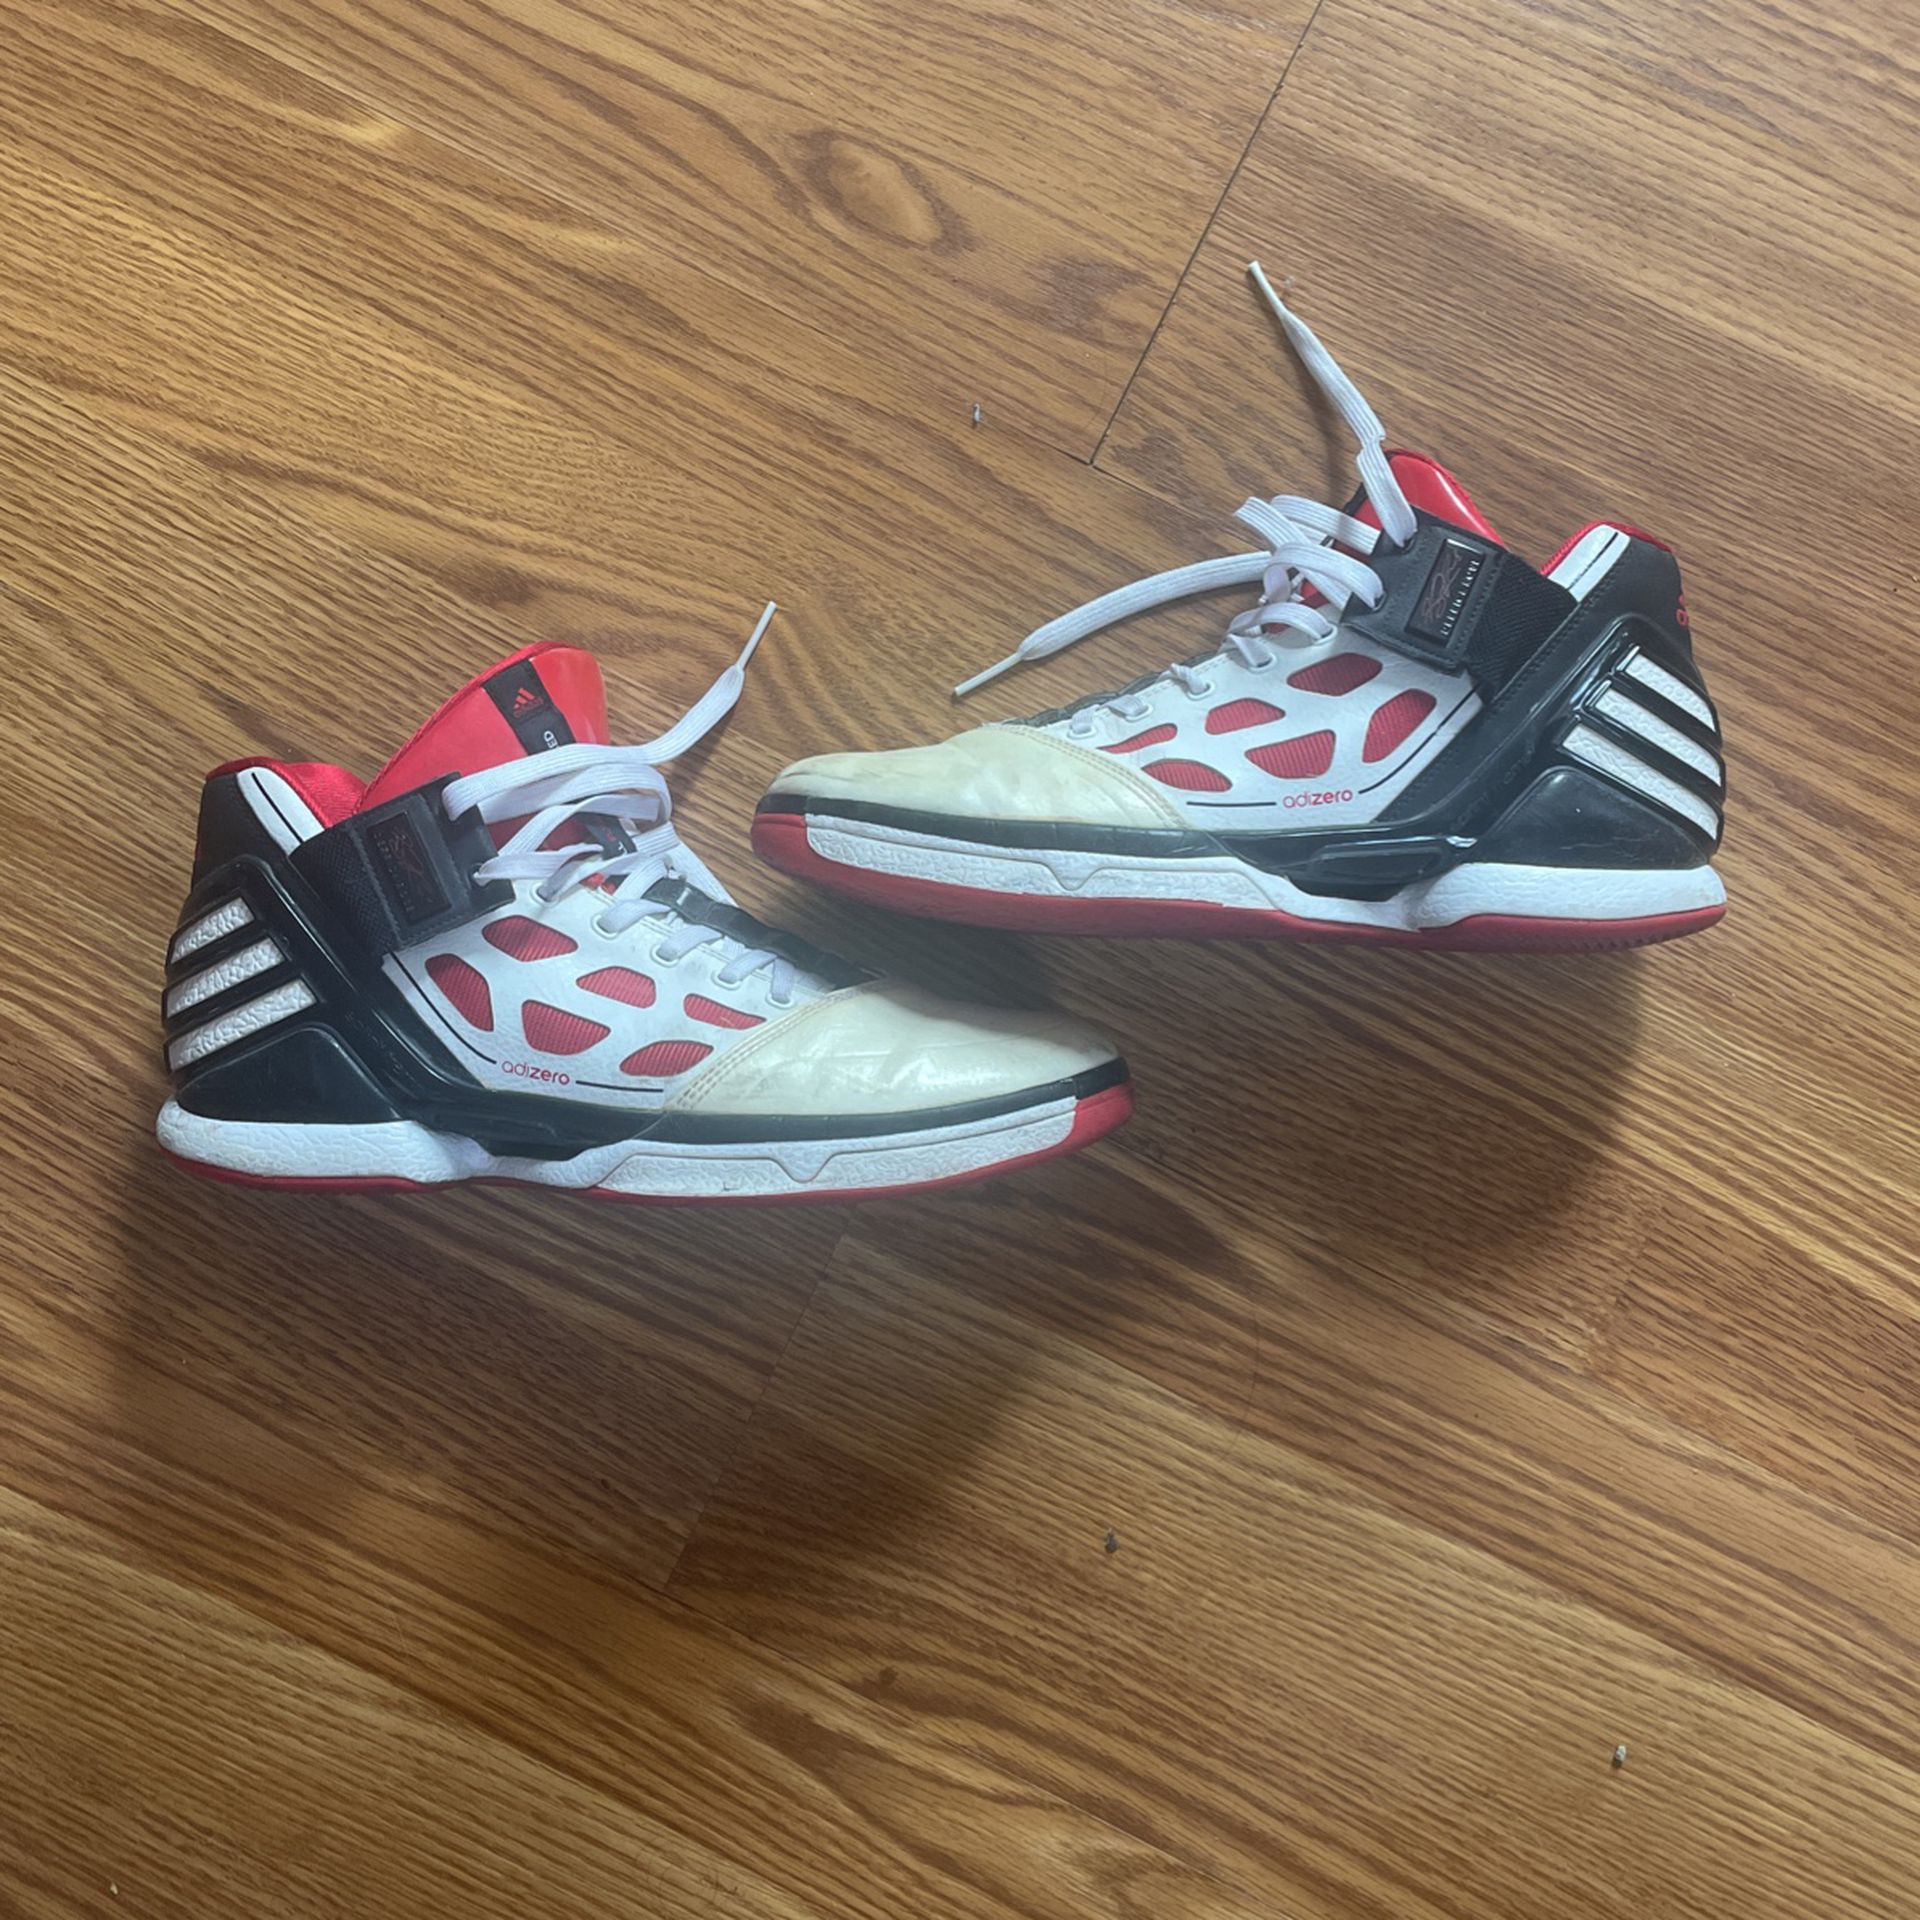 Adidas D.Rose 1.5 Restomod Size 10 for Sale in Jersey City, NJ - OfferUp